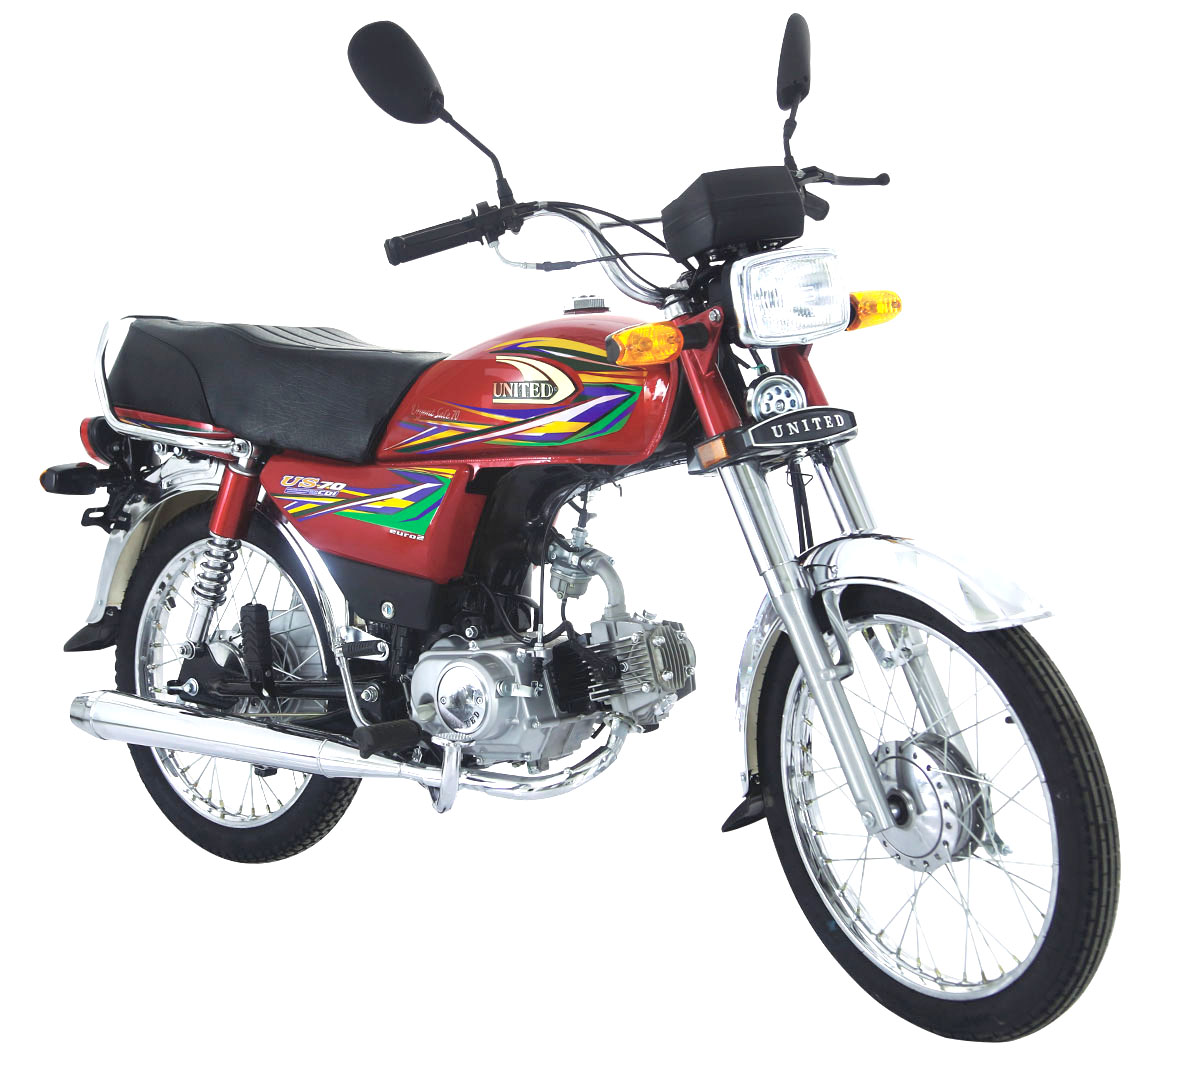 United Motorcycle 70cc Price In Pakistan 2020 Is Available